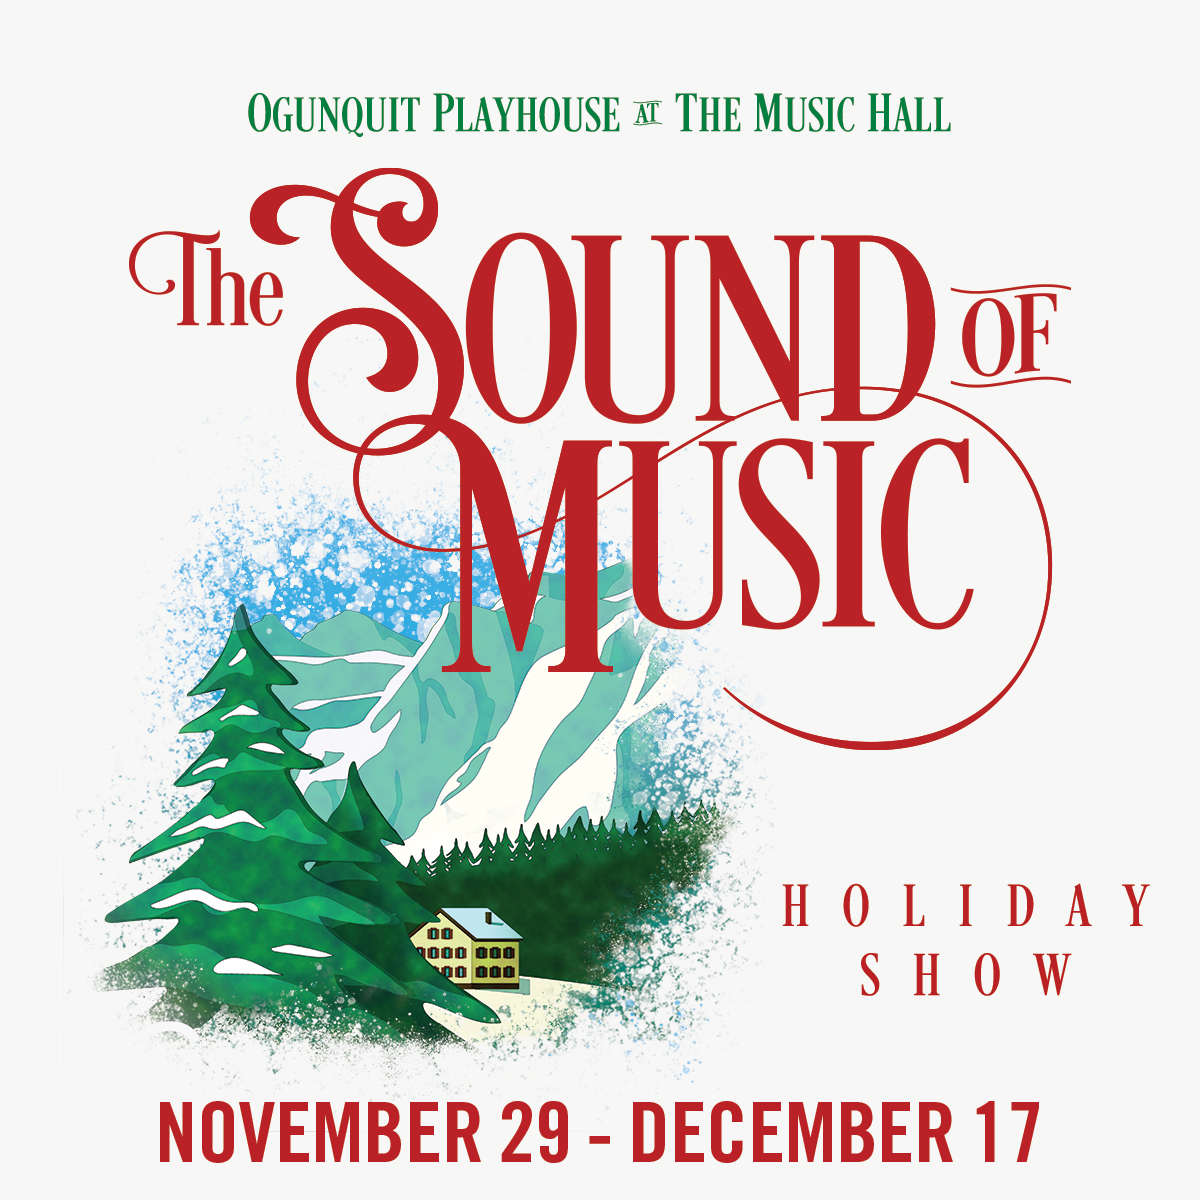 Raise your hand if you're ready for #TheSoundofMusic! 🙌 Performances begin Nov. 29, with tickets as low as $35 for previews (and that's just one of our favorite things!) Get your seats today! bit.ly/3nmWlRK